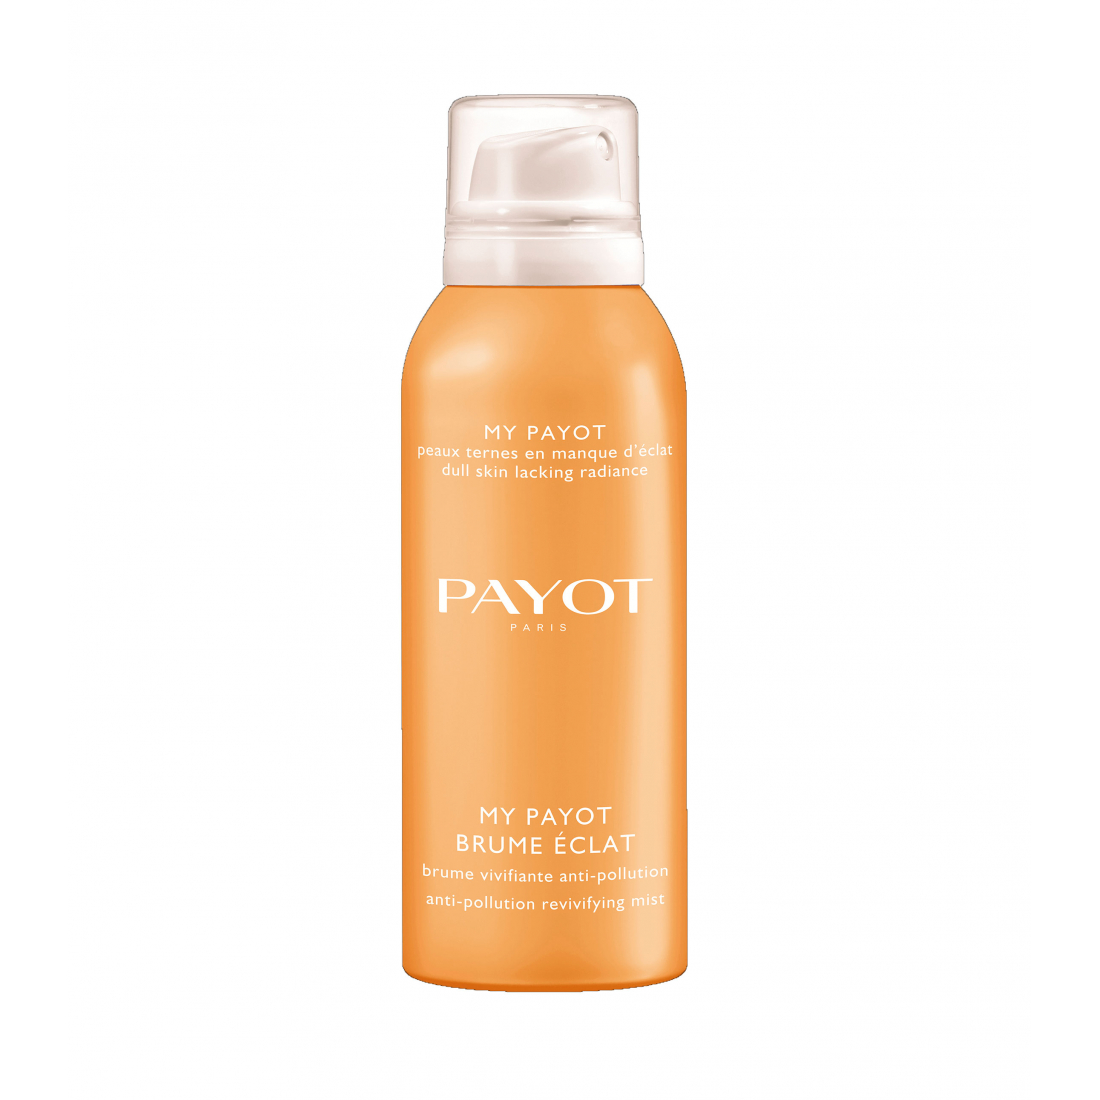 'My Payot Glow' Face Mist - 125 ml